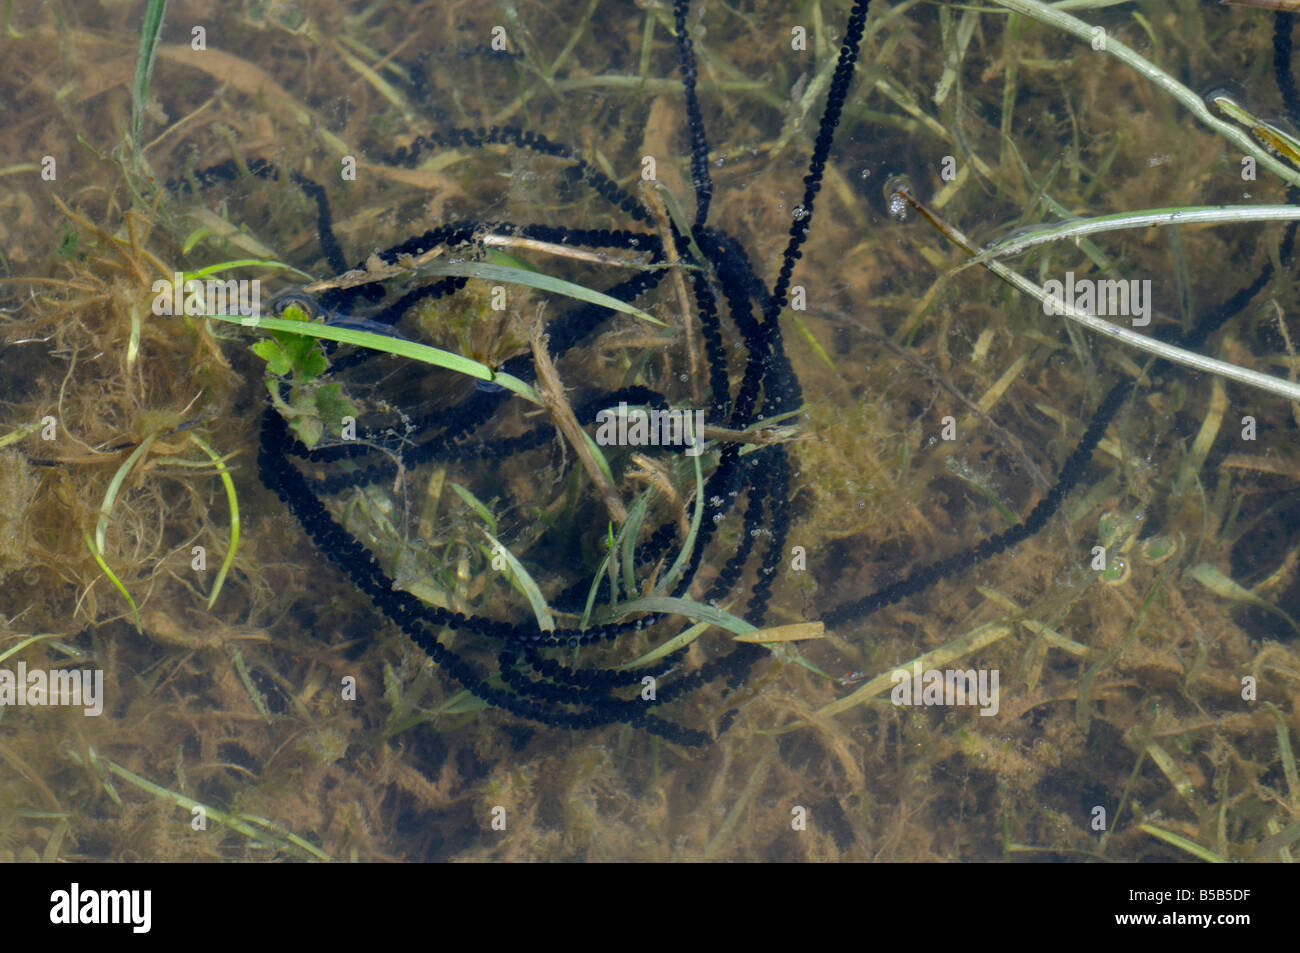 European Toad, Common Toad (Bufo bufo), egg strings among underwater vegetation Stock Photo